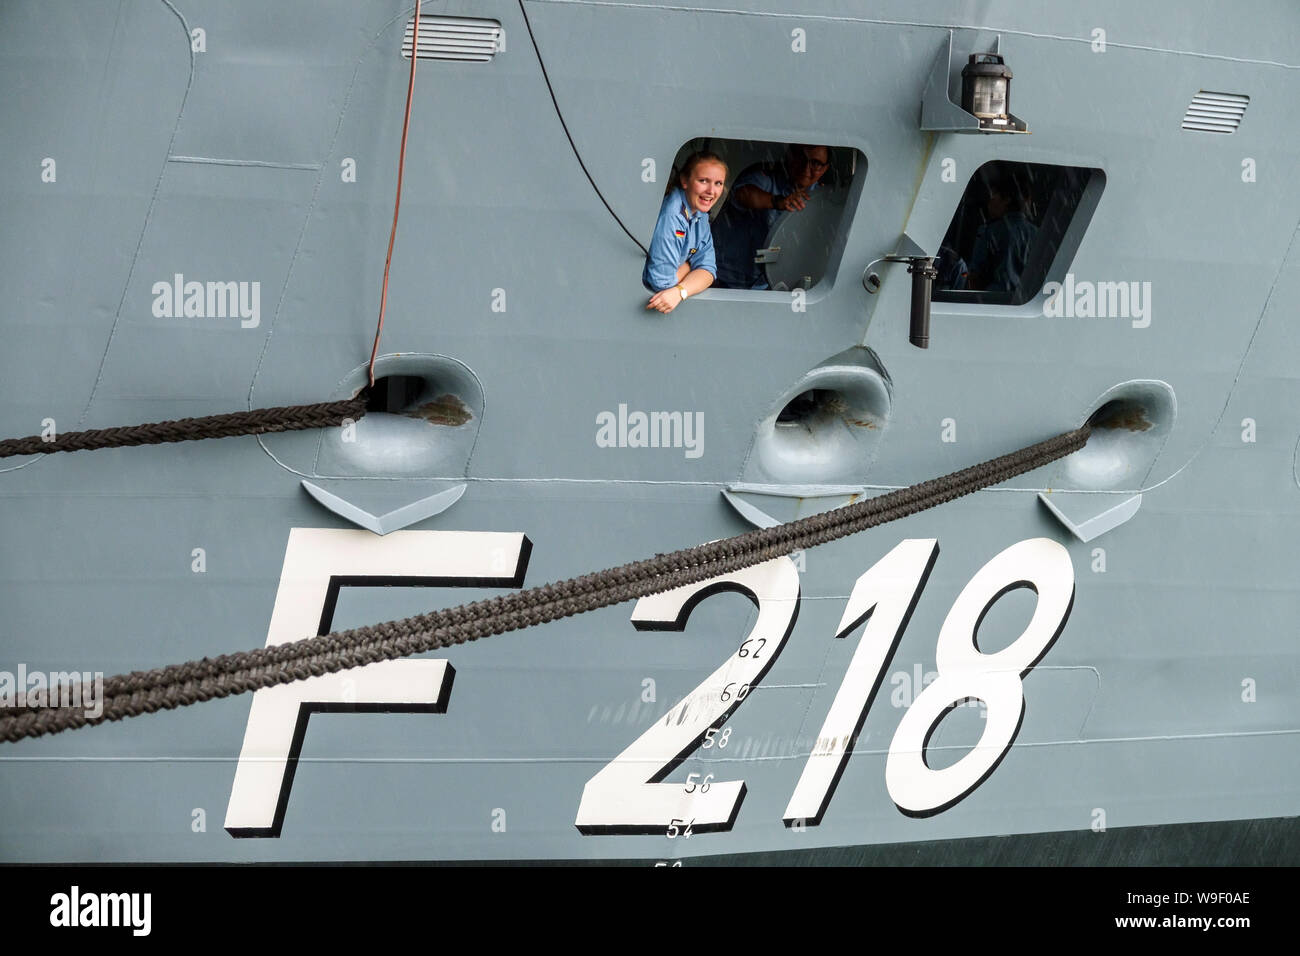 A crew member woman in a window at the stern of a ship, German army women German frigate Mecklenburg-Vorpommern in Rostock Germany marine Stock Photo